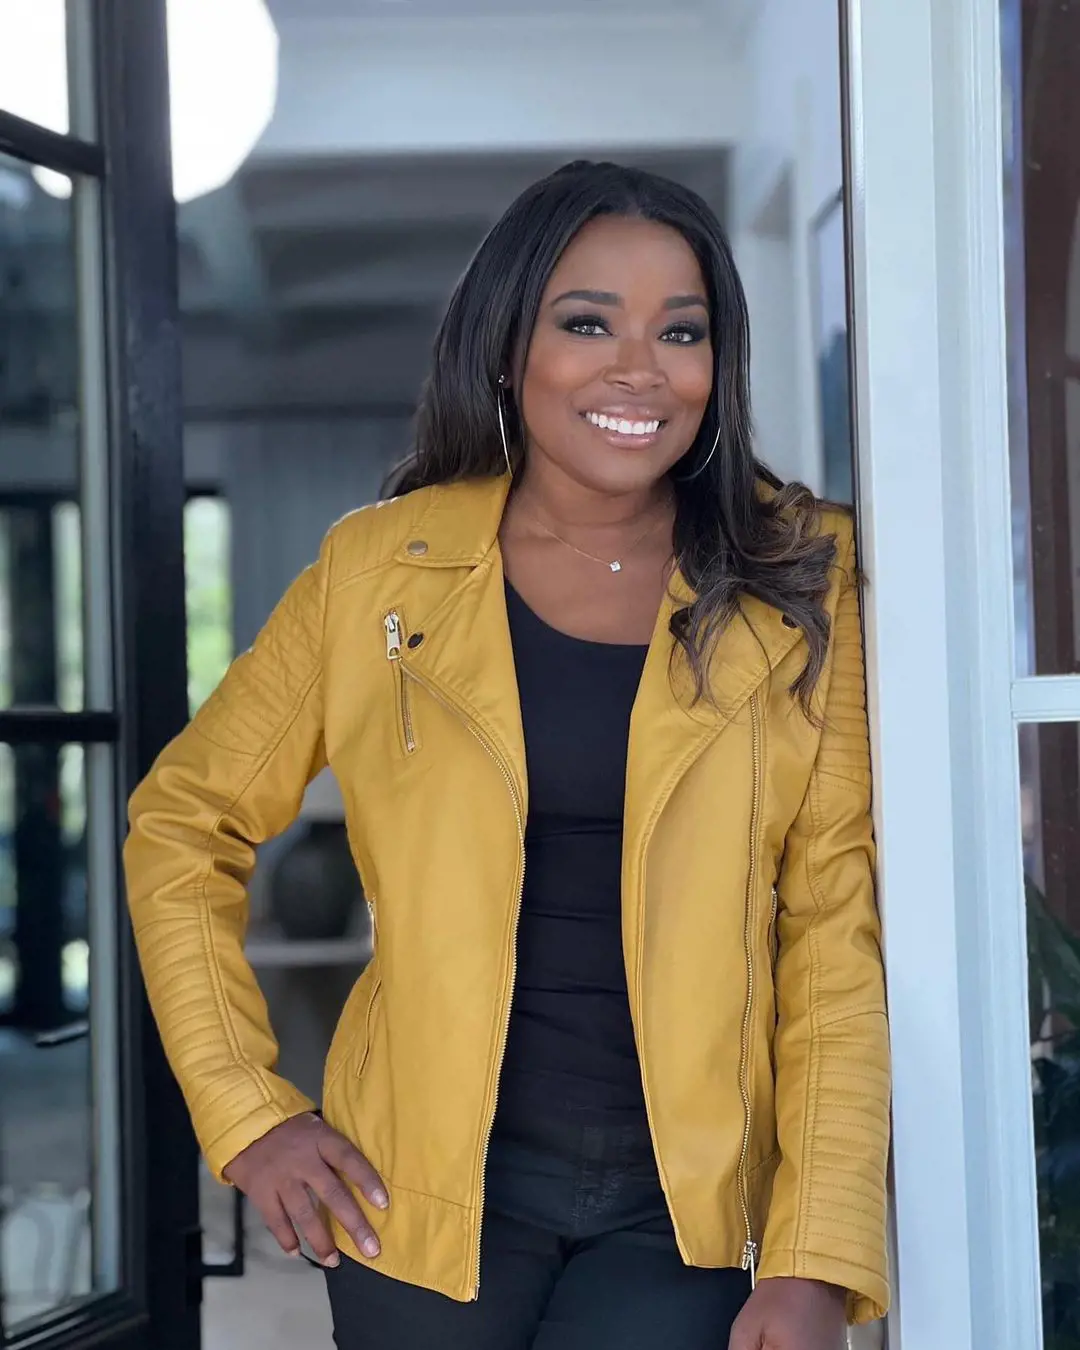 The popular face of HGTV channel Tiffany is also a judge of the reality show